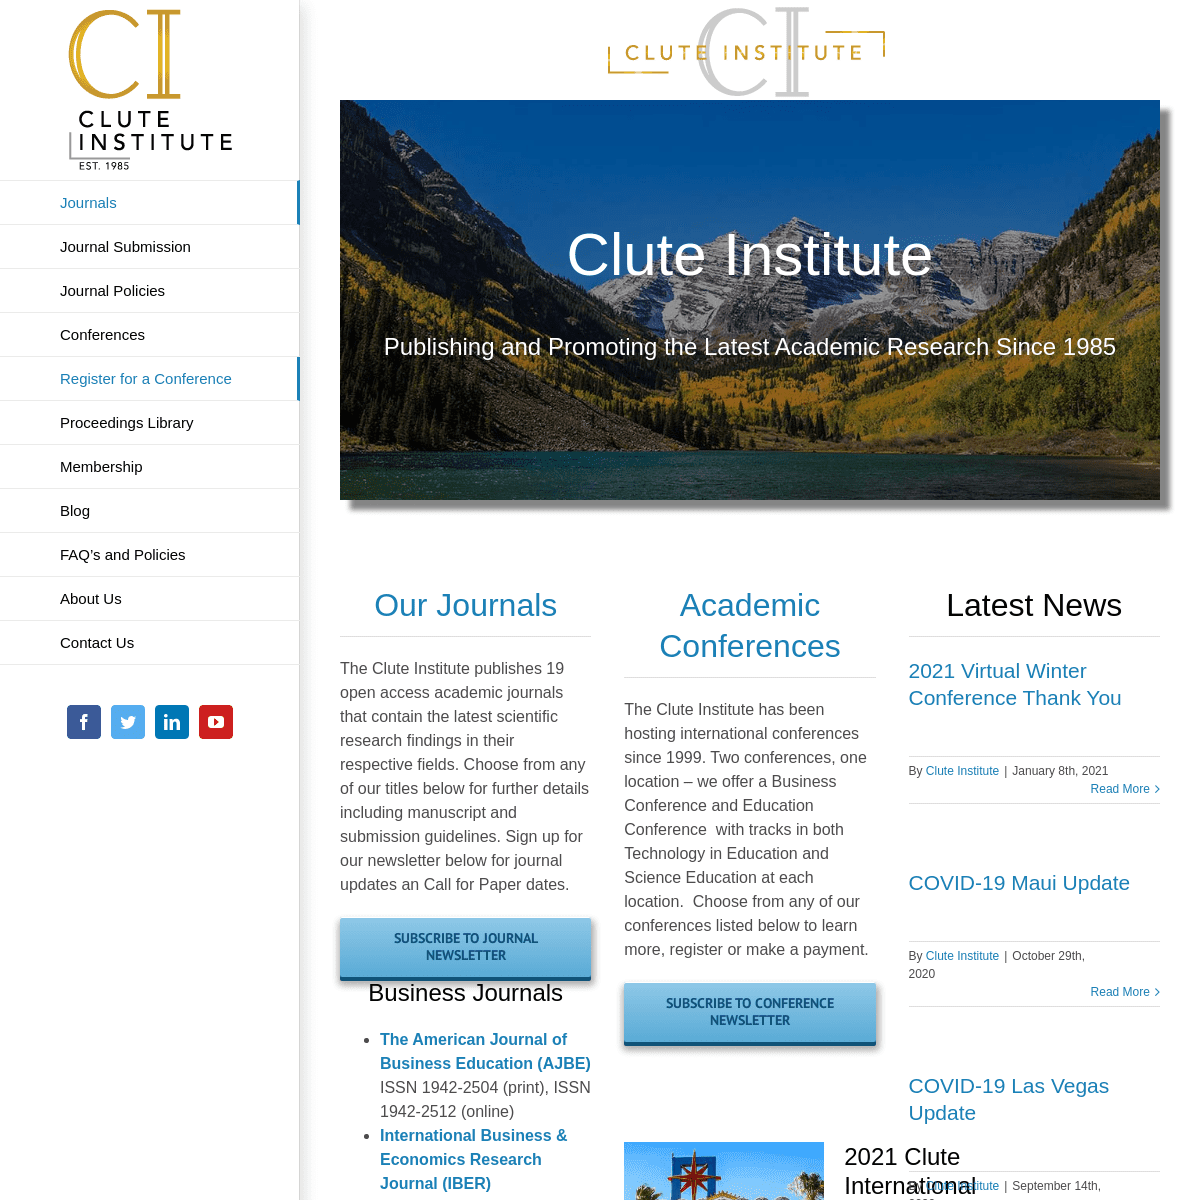 A complete backup of https://cluteinstitute.com